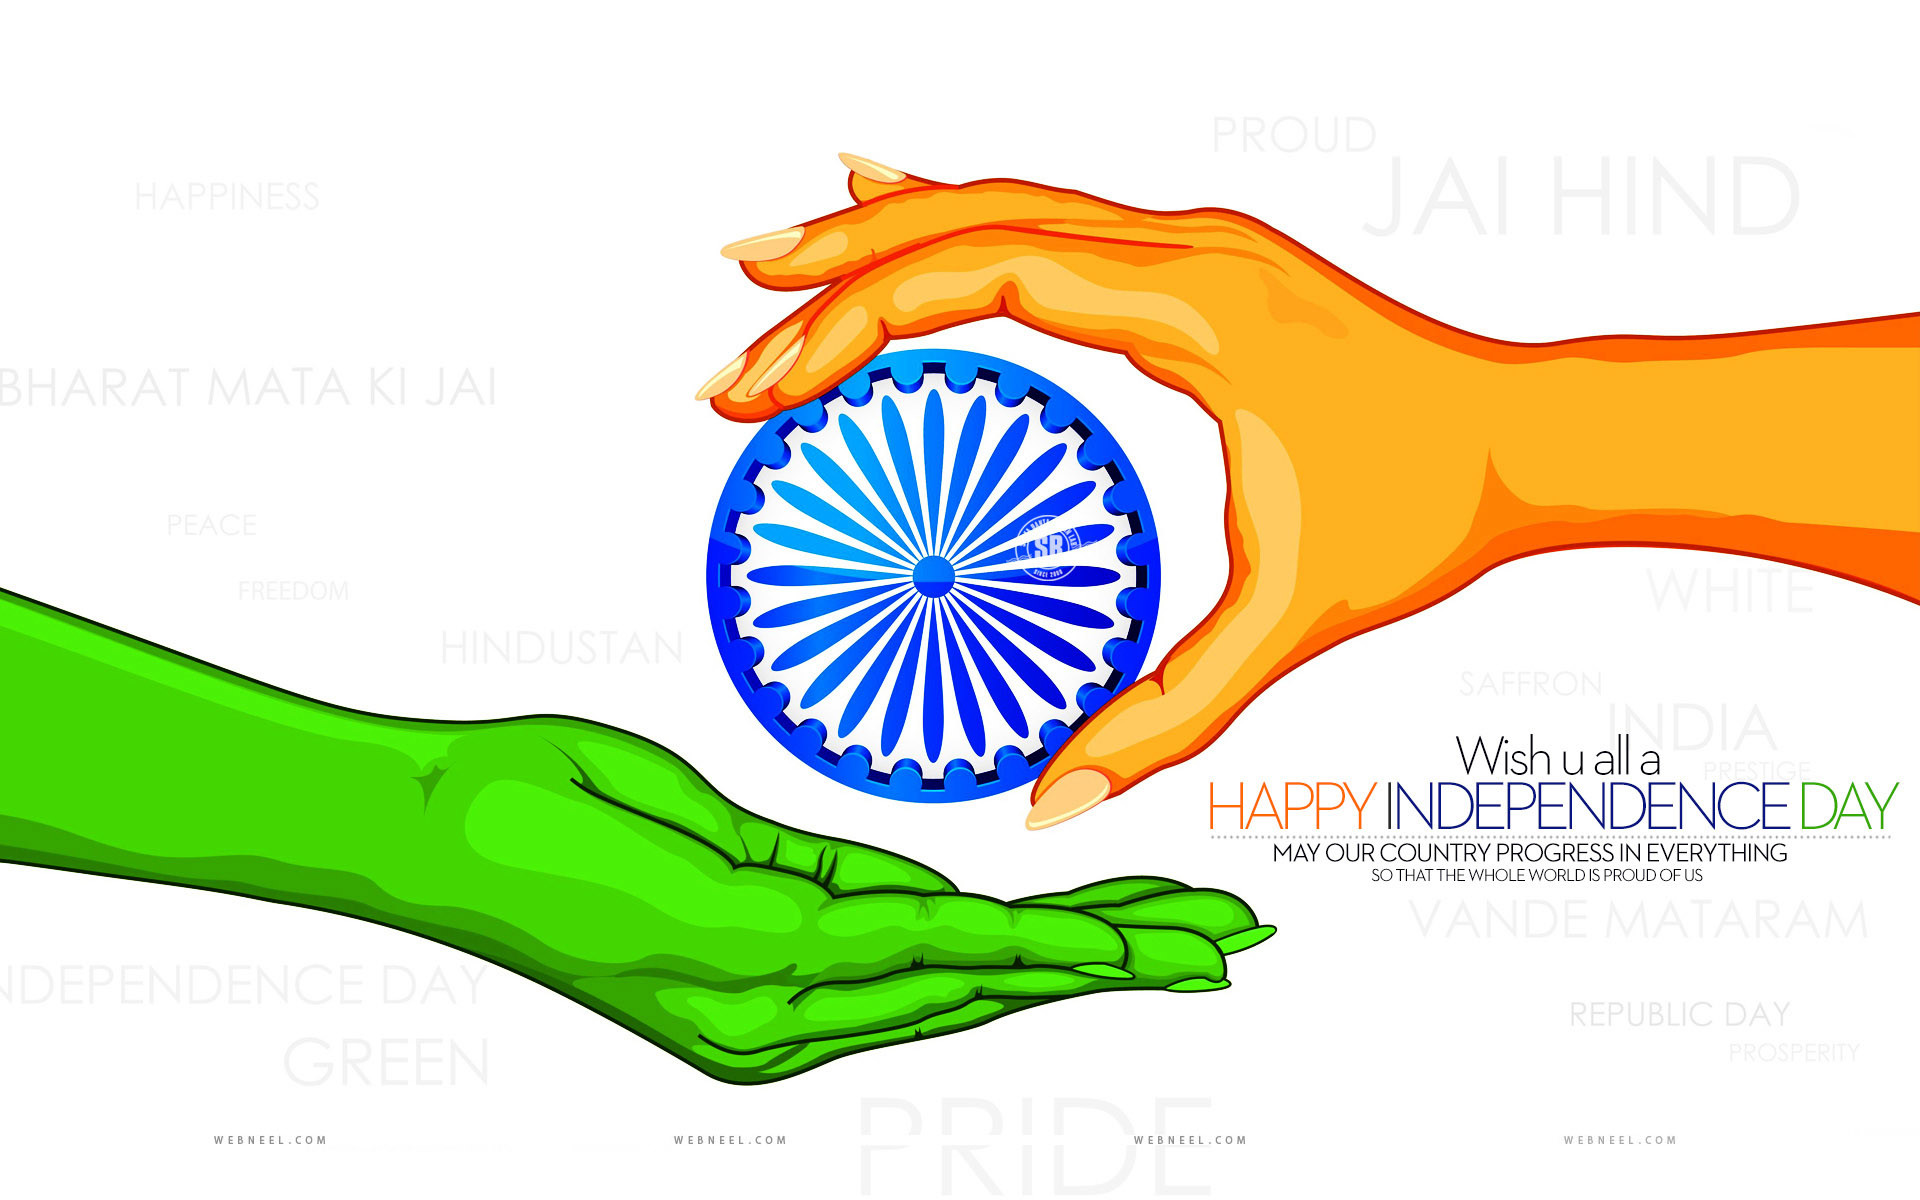 1920x1200 India independence day wallpaper independence day wallpaper